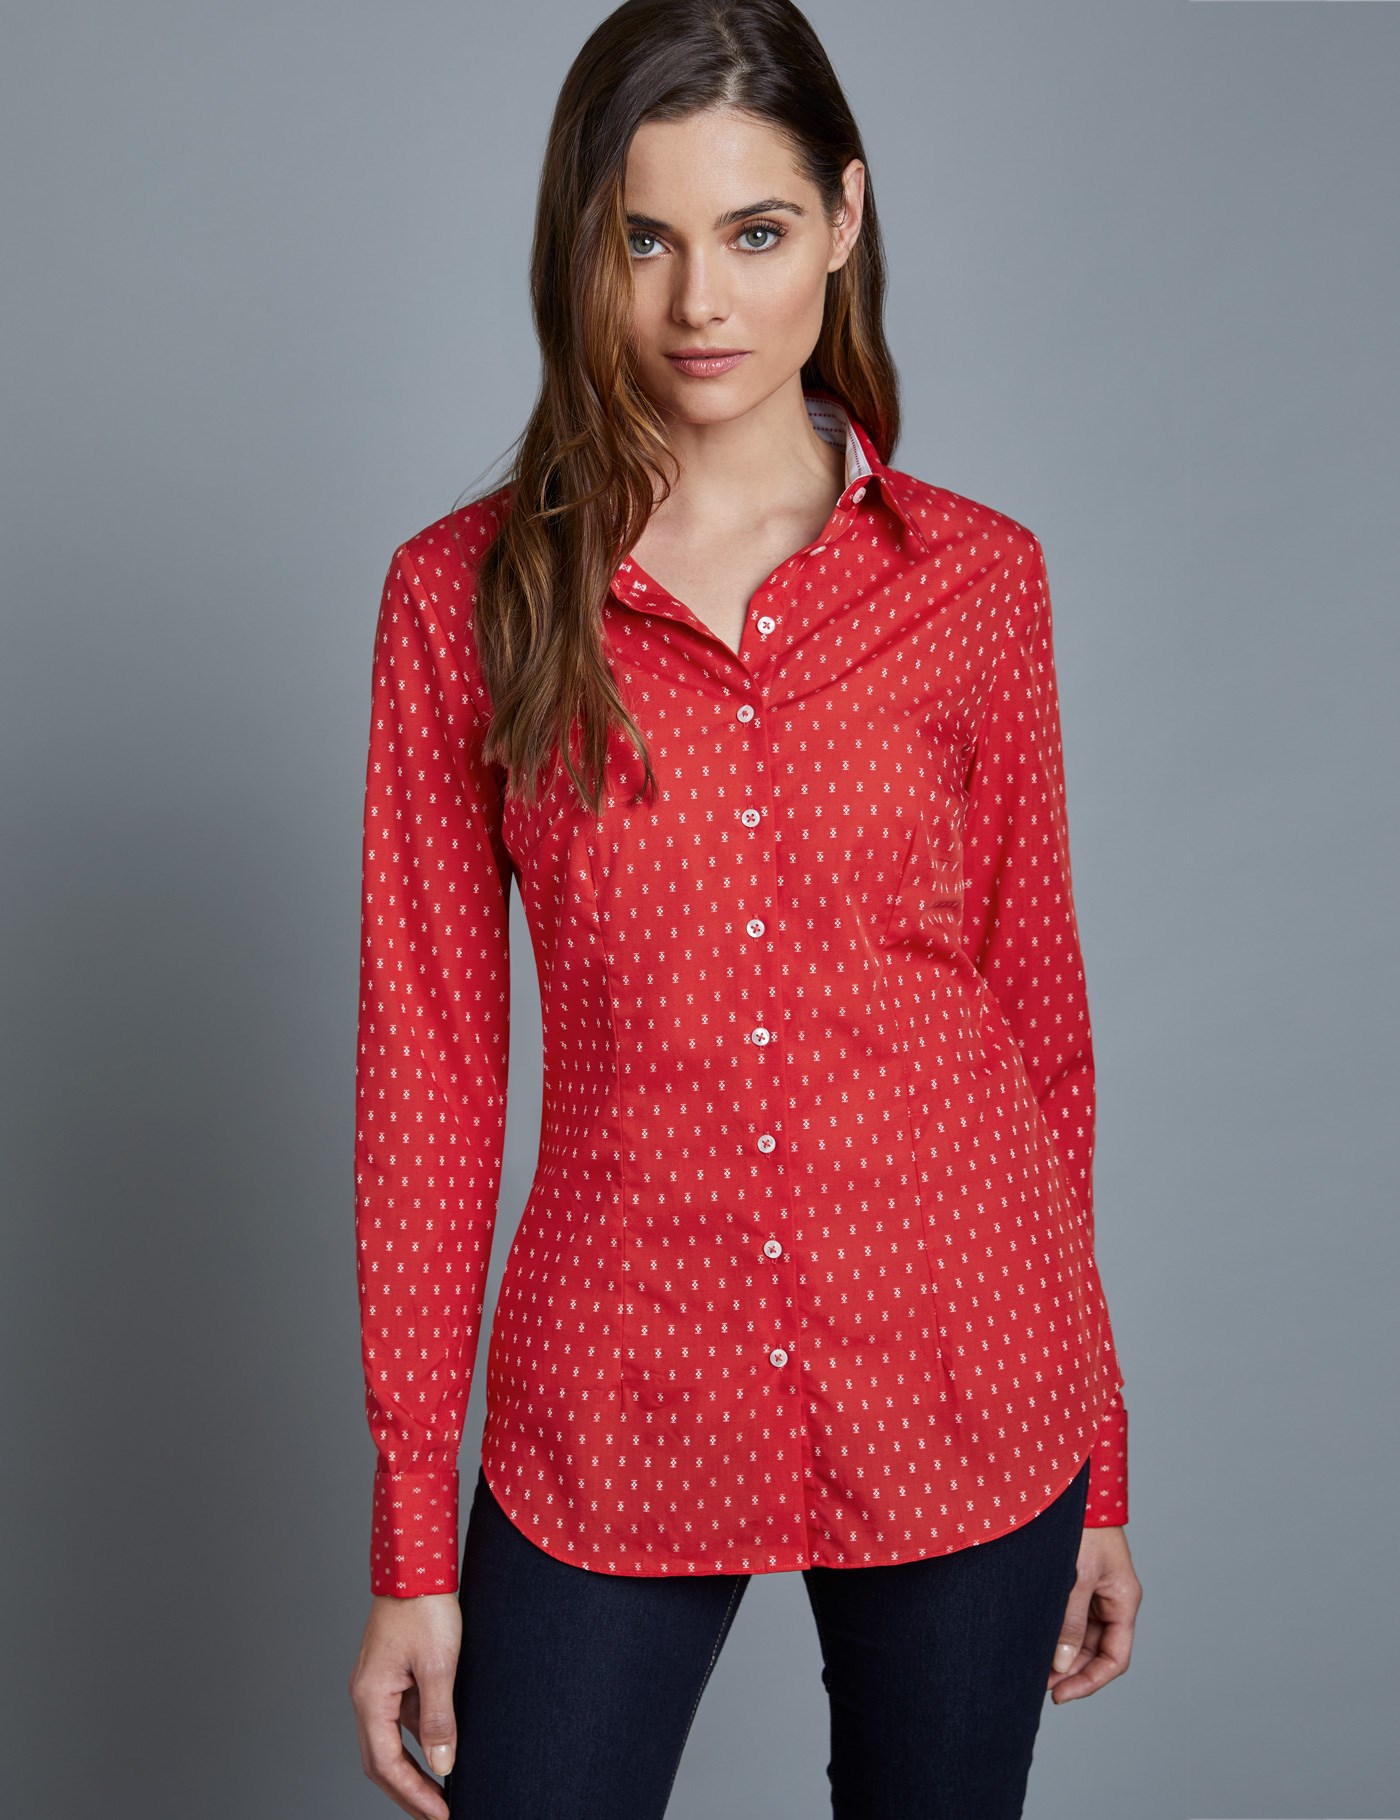 Women’s Red & White Dobby Fitted Shirt – Double Cuffs | Hawes & Curtis